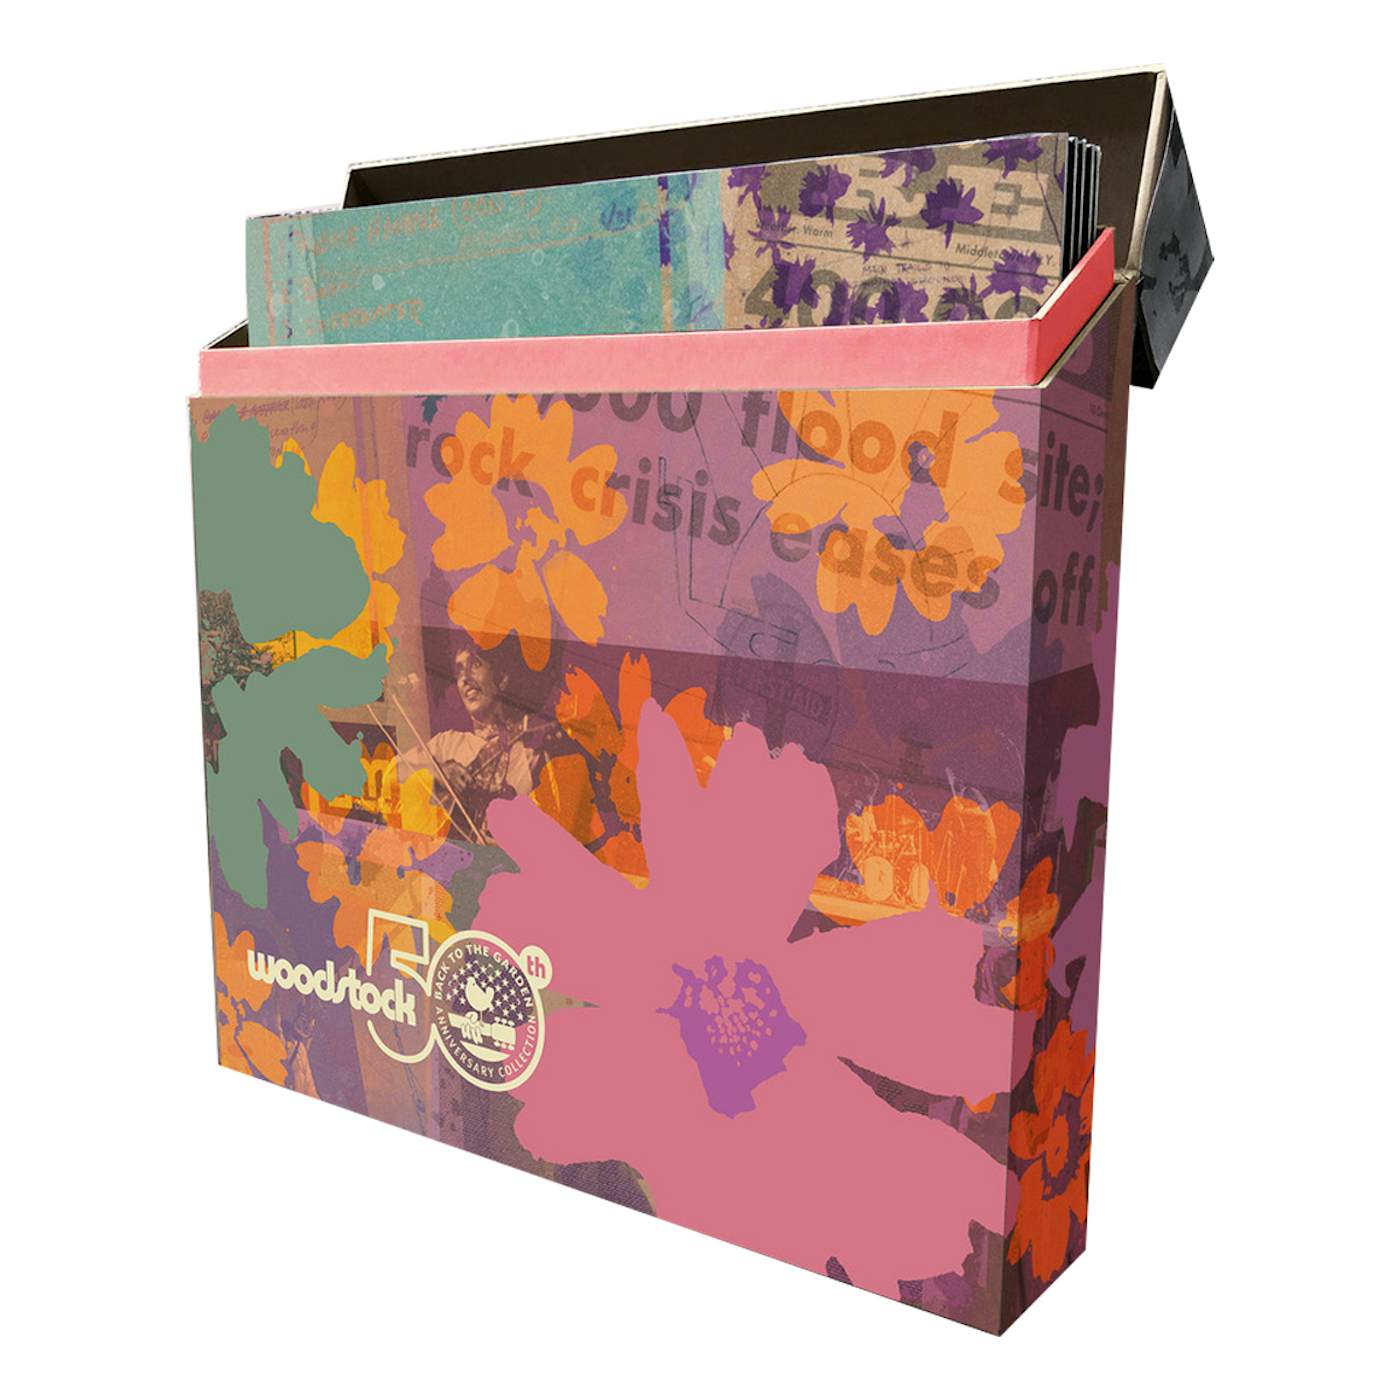 Woodstock - Back To The Garden: 50th Anniversary Collection (5 LP Set) (Vinyl)